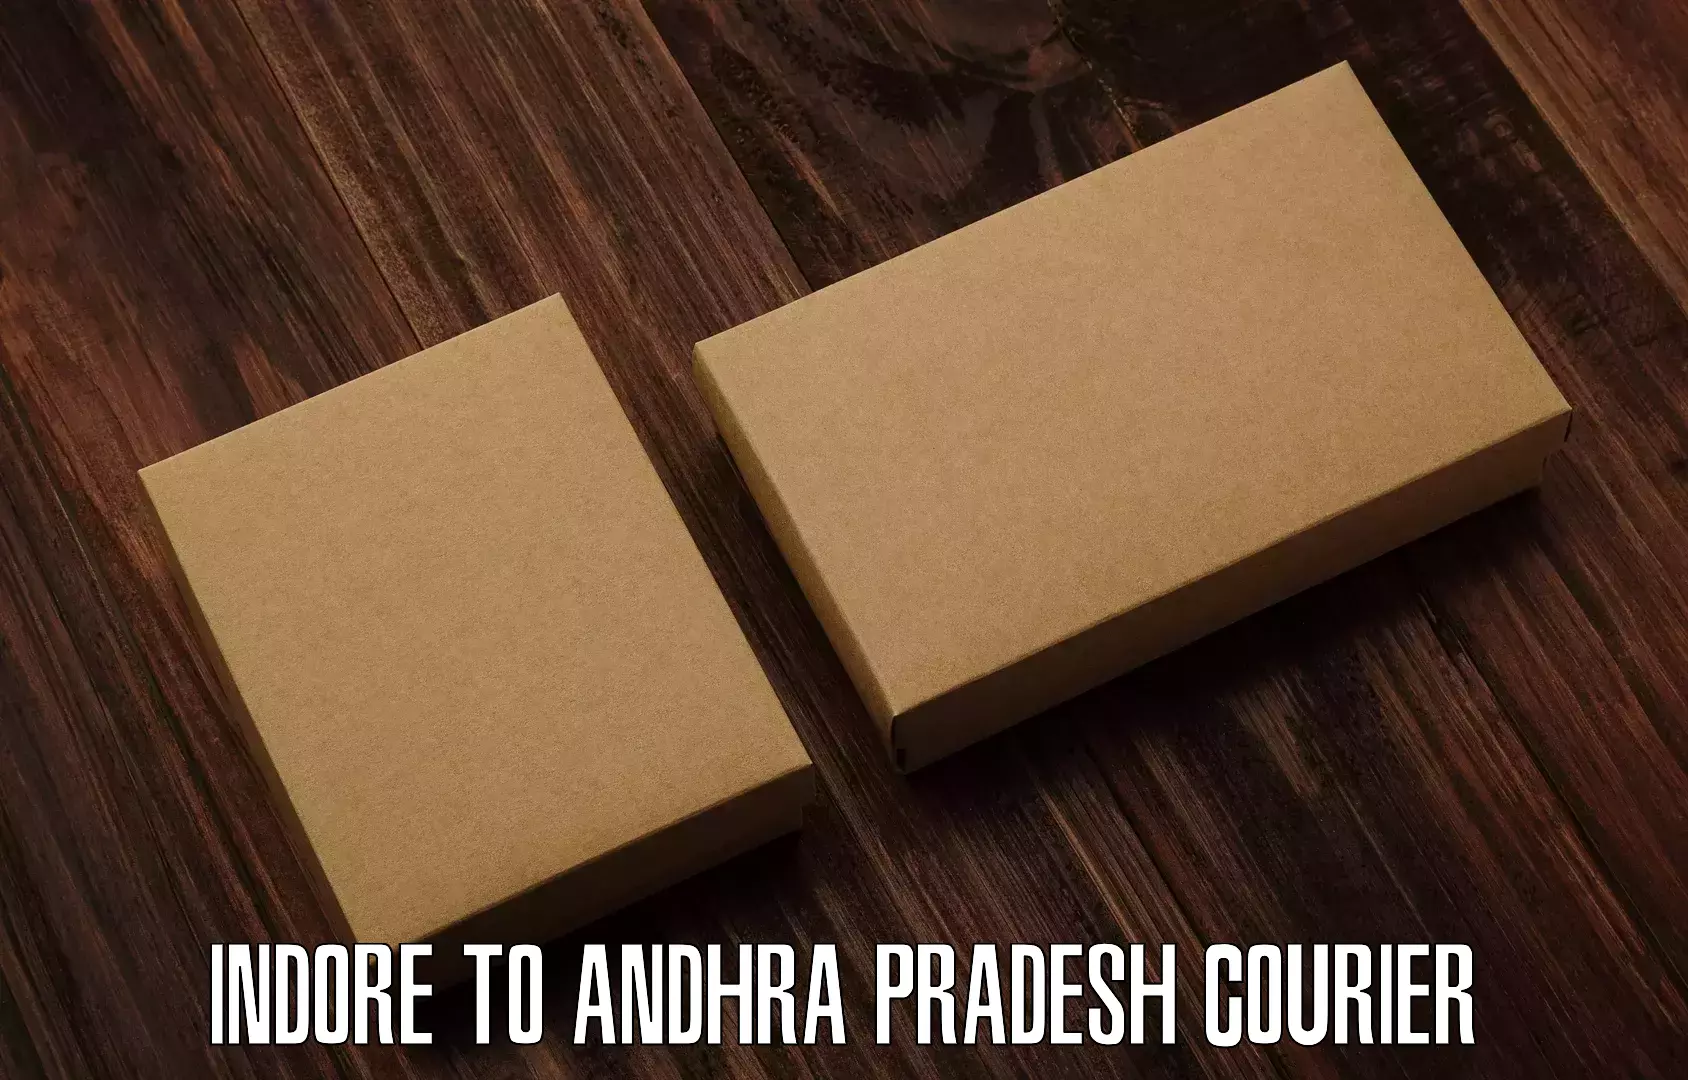 Subscription-based courier Indore to Andhra Pradesh